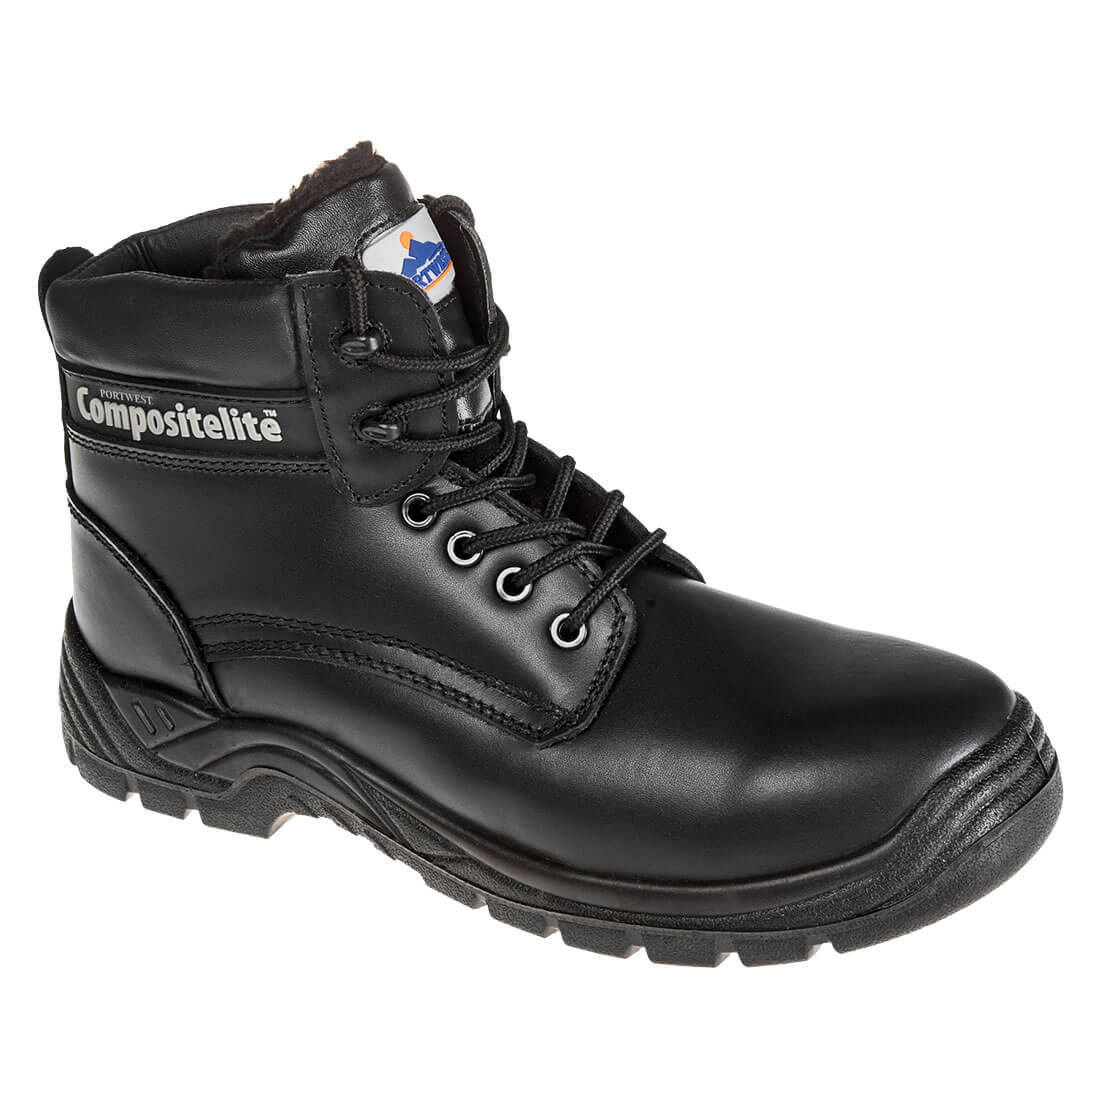 Portwest Thor Fur Lined Cold Weather Safety Boots Black Size 6